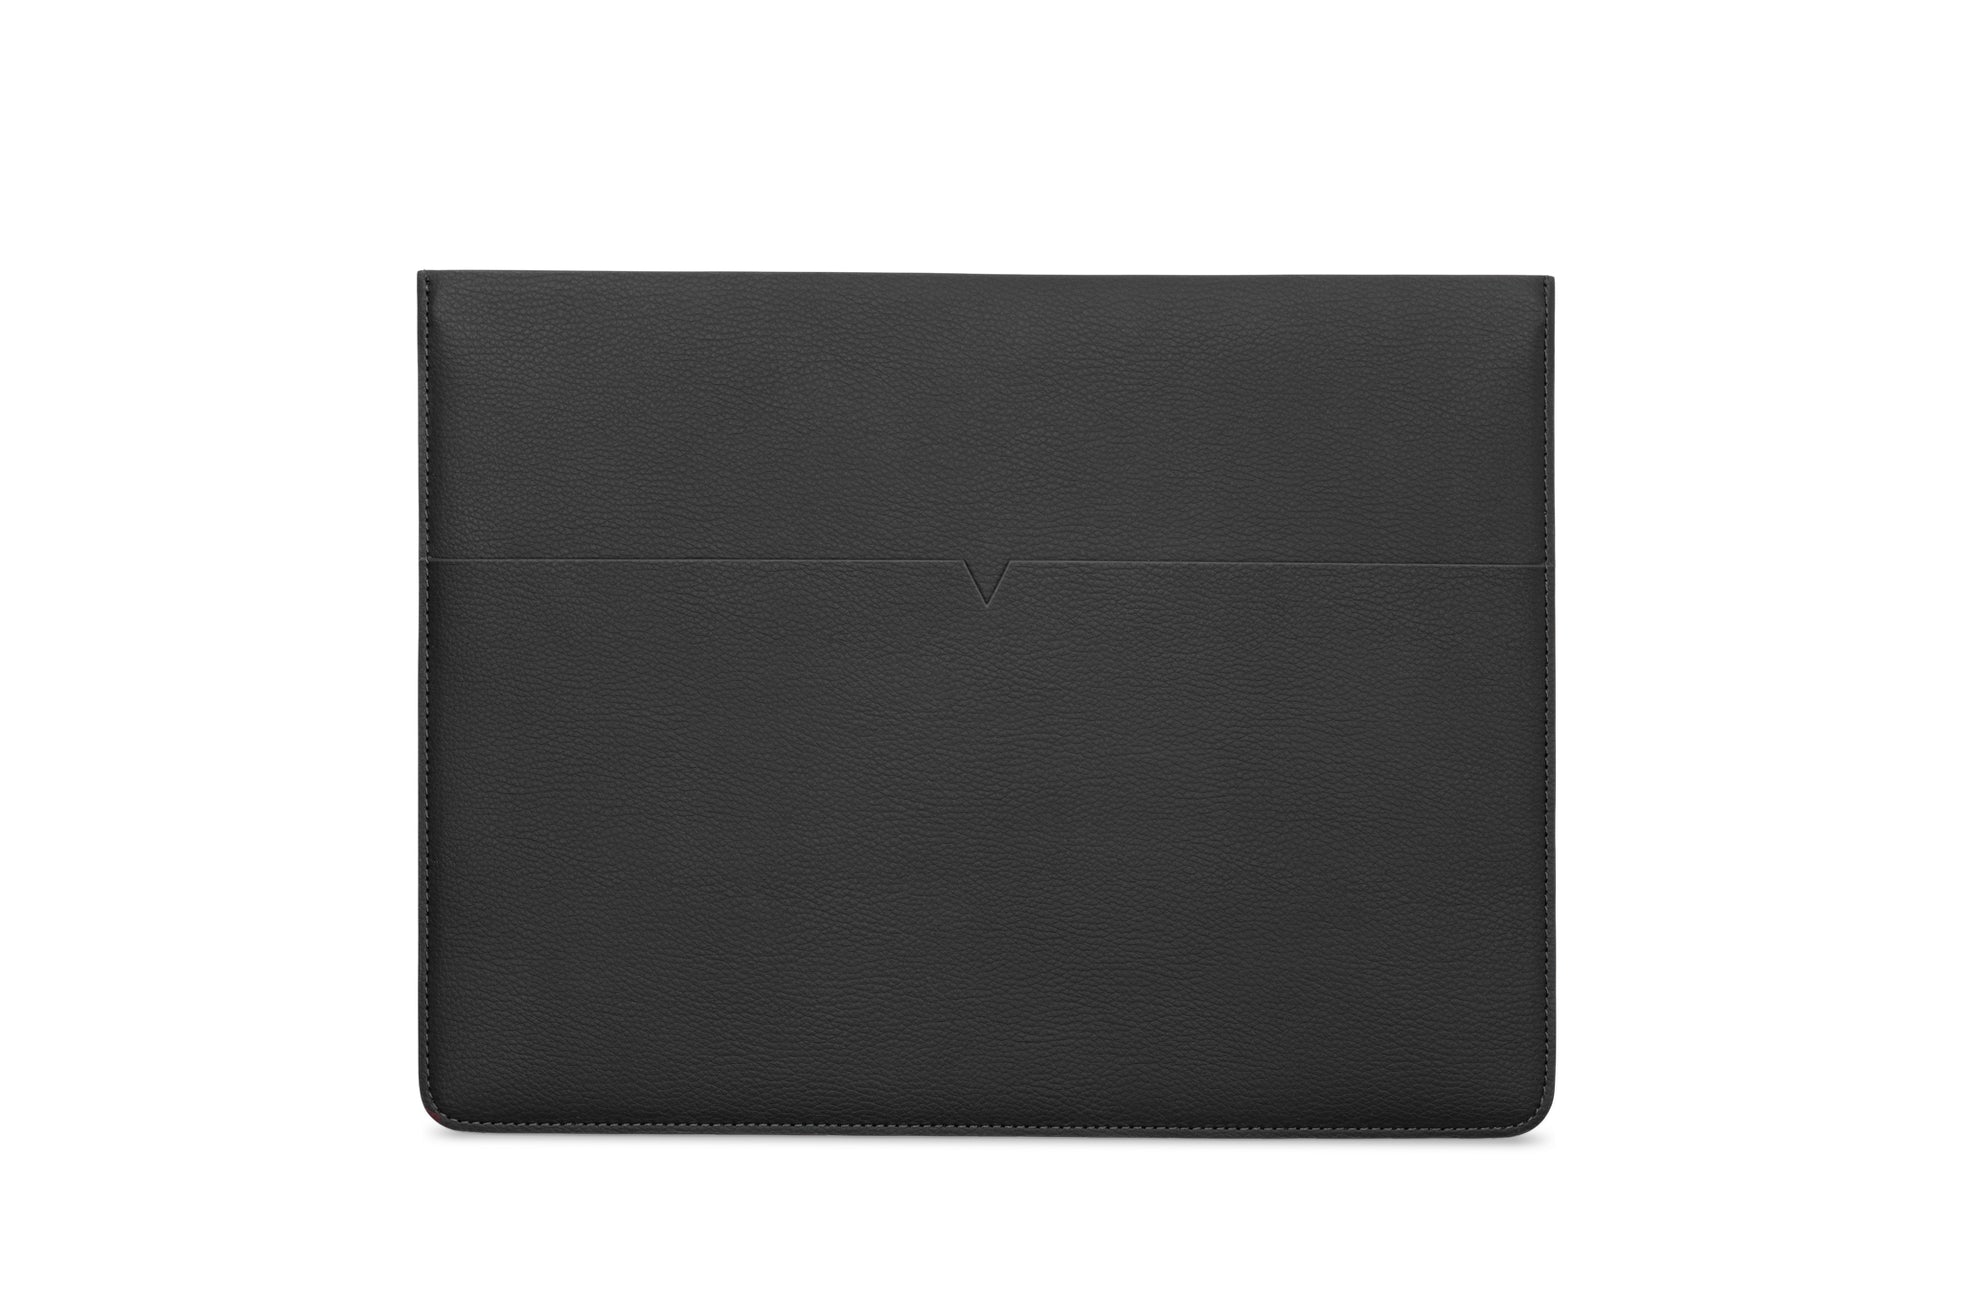 Genuine Apple MacBook Pro Air 13 Sleeve Pouch Case Cover - Black